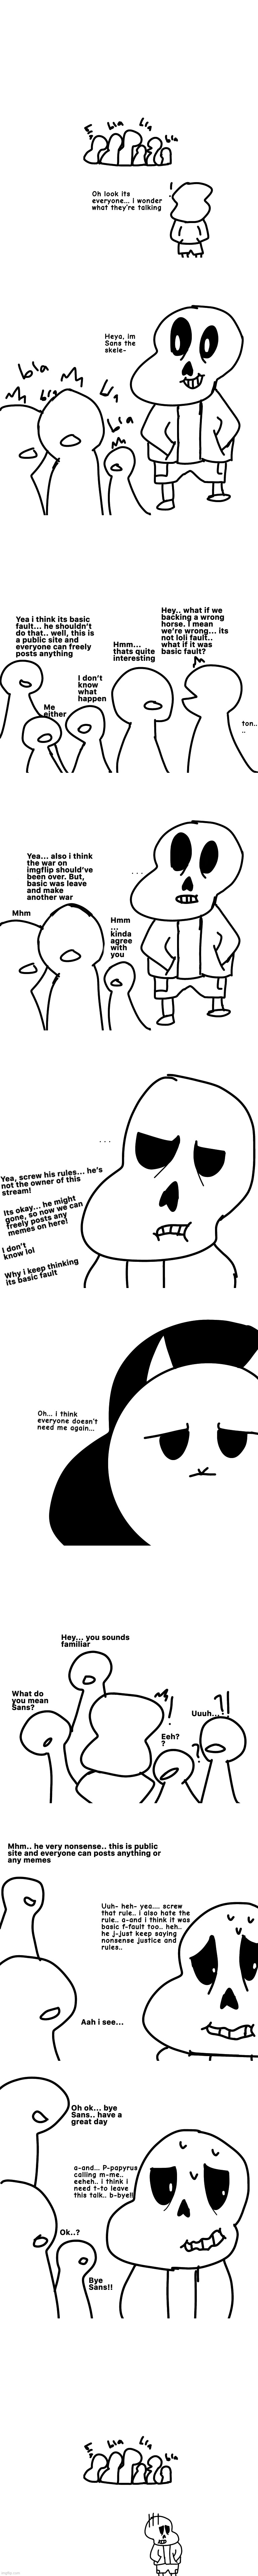 Hey i made a funny Undertale comic about Sans!! Feel free to laugh! | image tagged in memes,funny,sans,undertale,comics/cartoons,comics | made w/ Imgflip meme maker